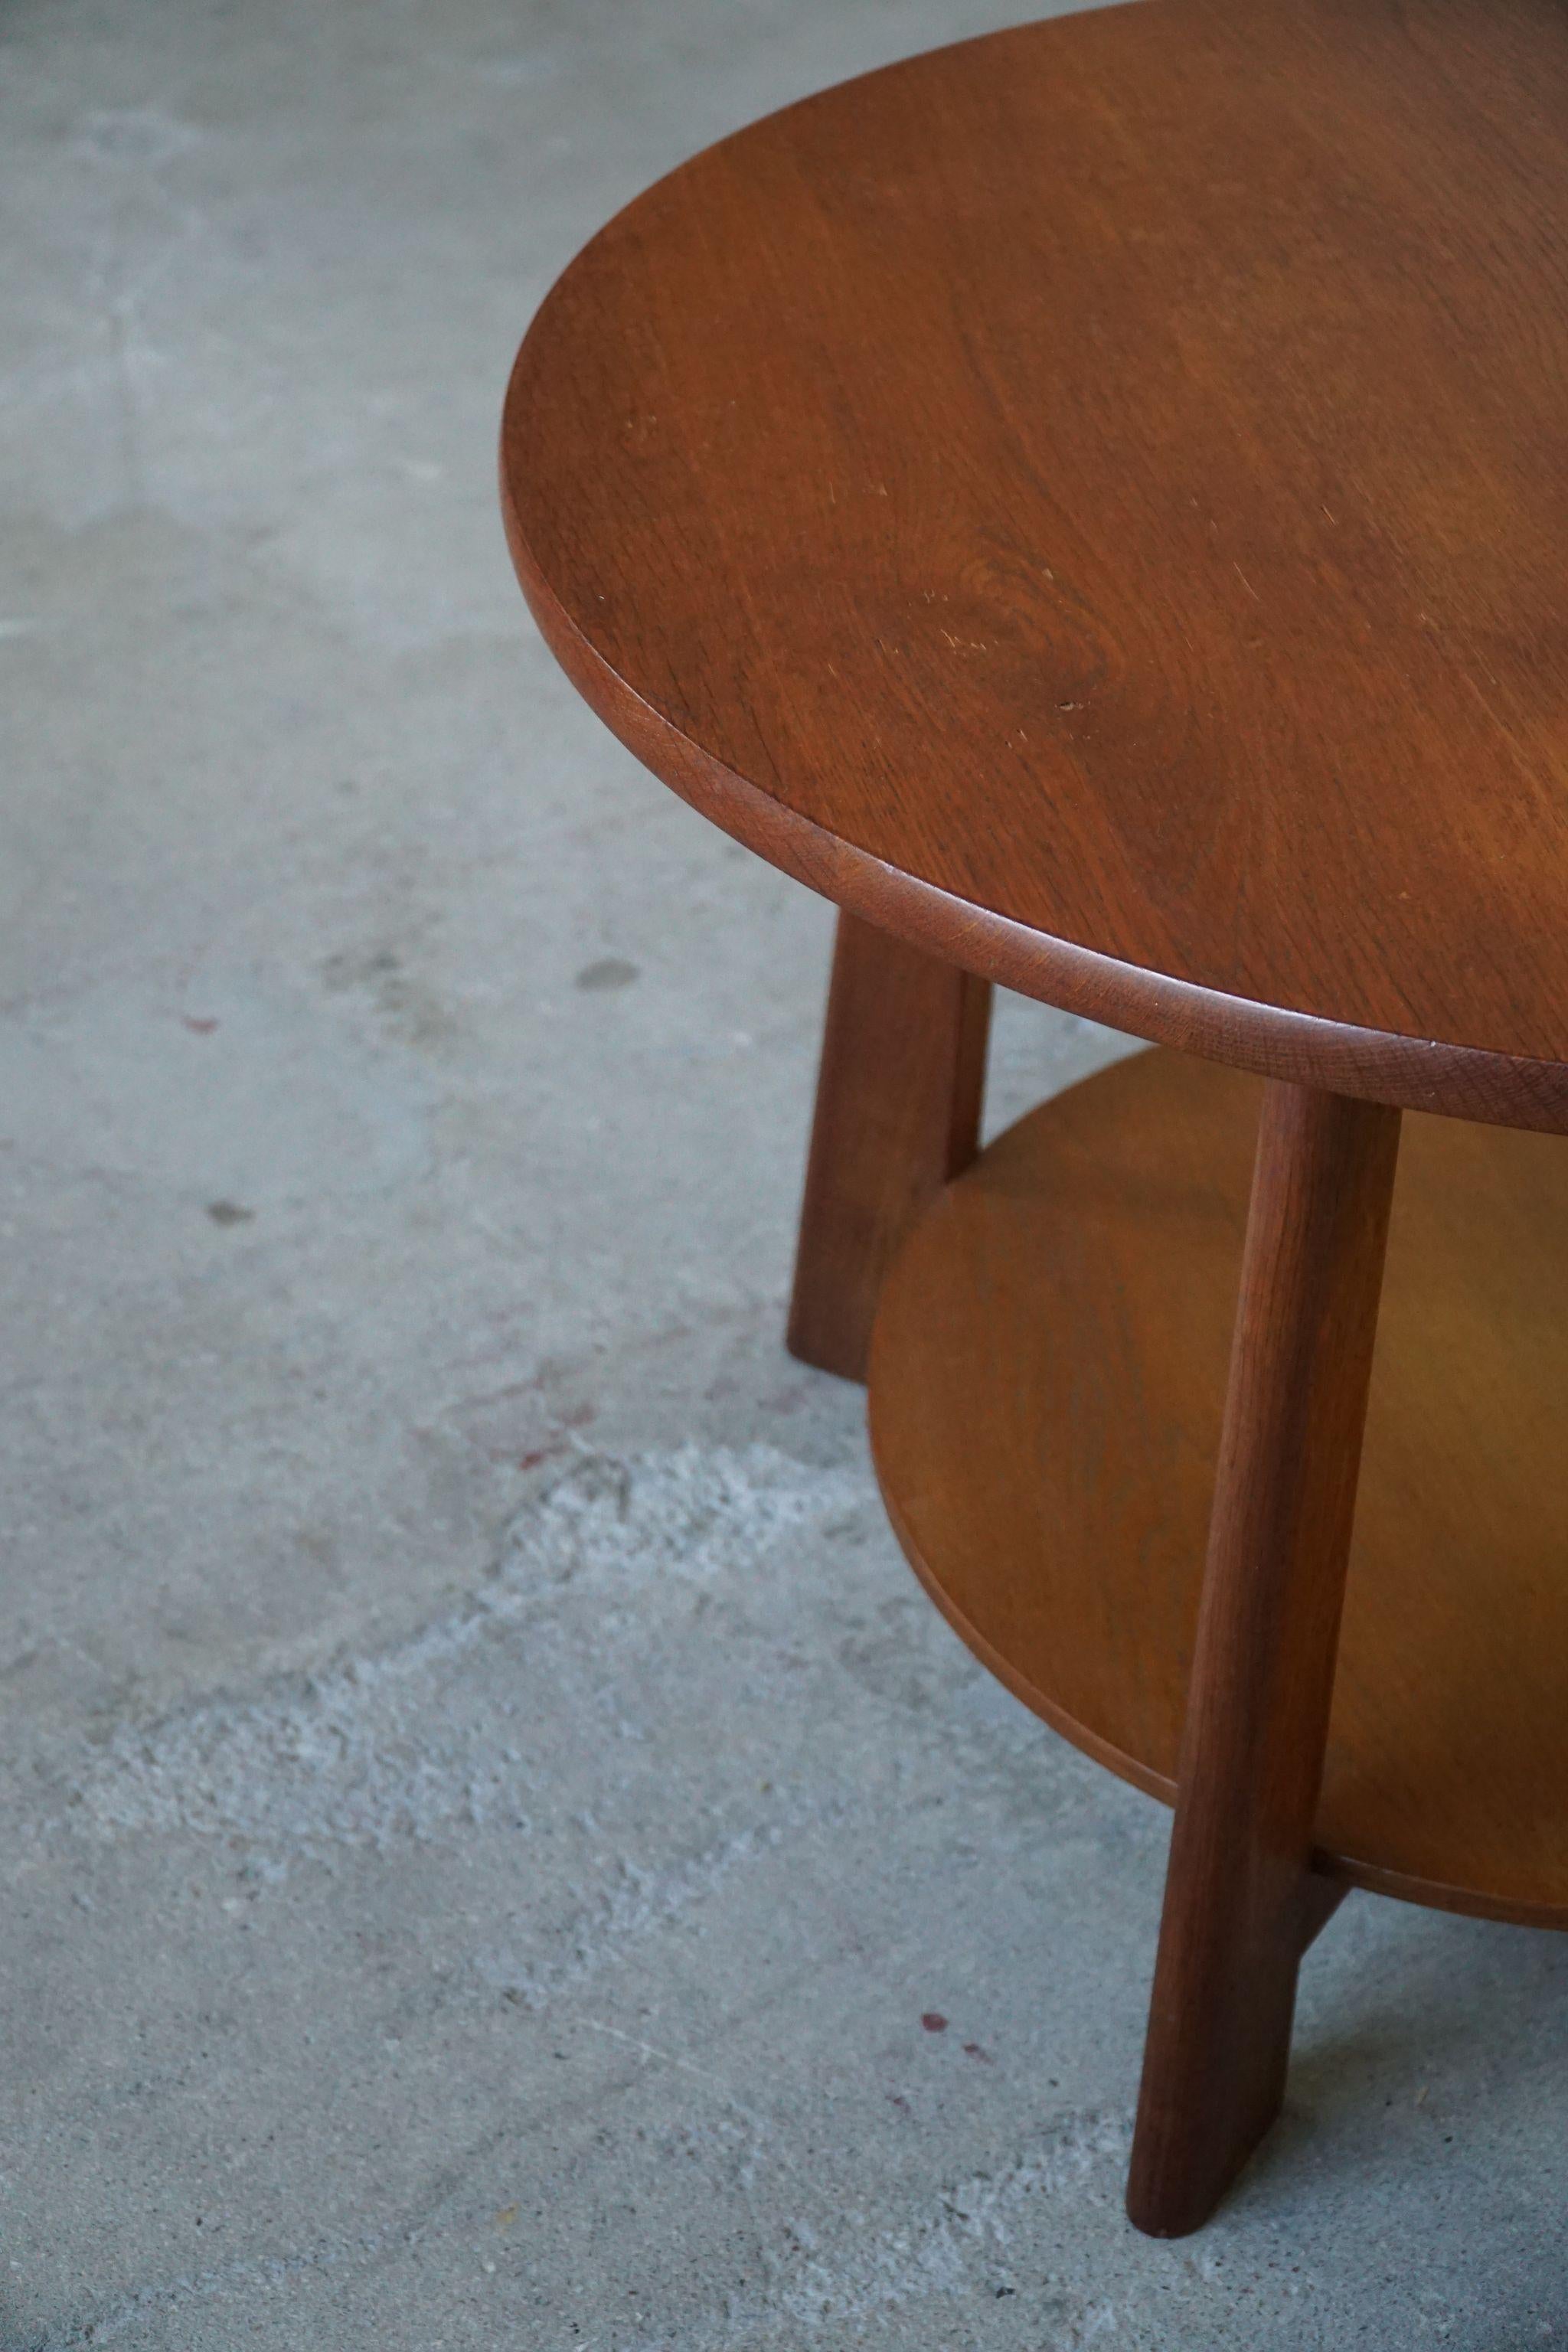 Otto Færge, Classic Round Side Table in Oak, Danish Modern, Made in 1940s 6